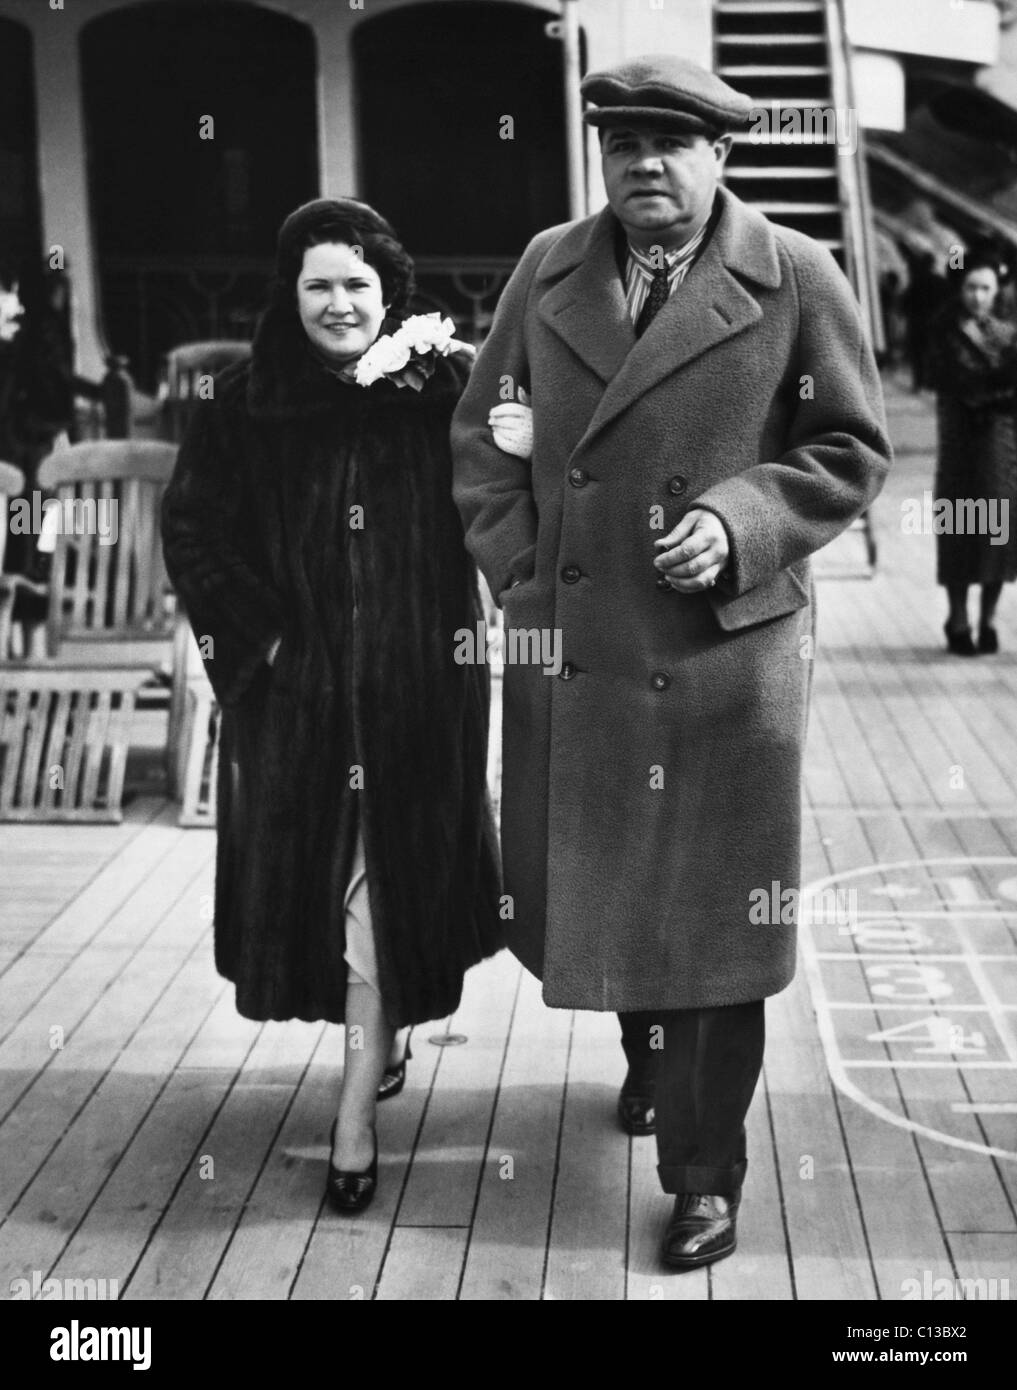 New York Yankees. Claire Hodgson Ruth and retired Yankees outfielder Babe Ruth, circa late 1930s. Stock Photo